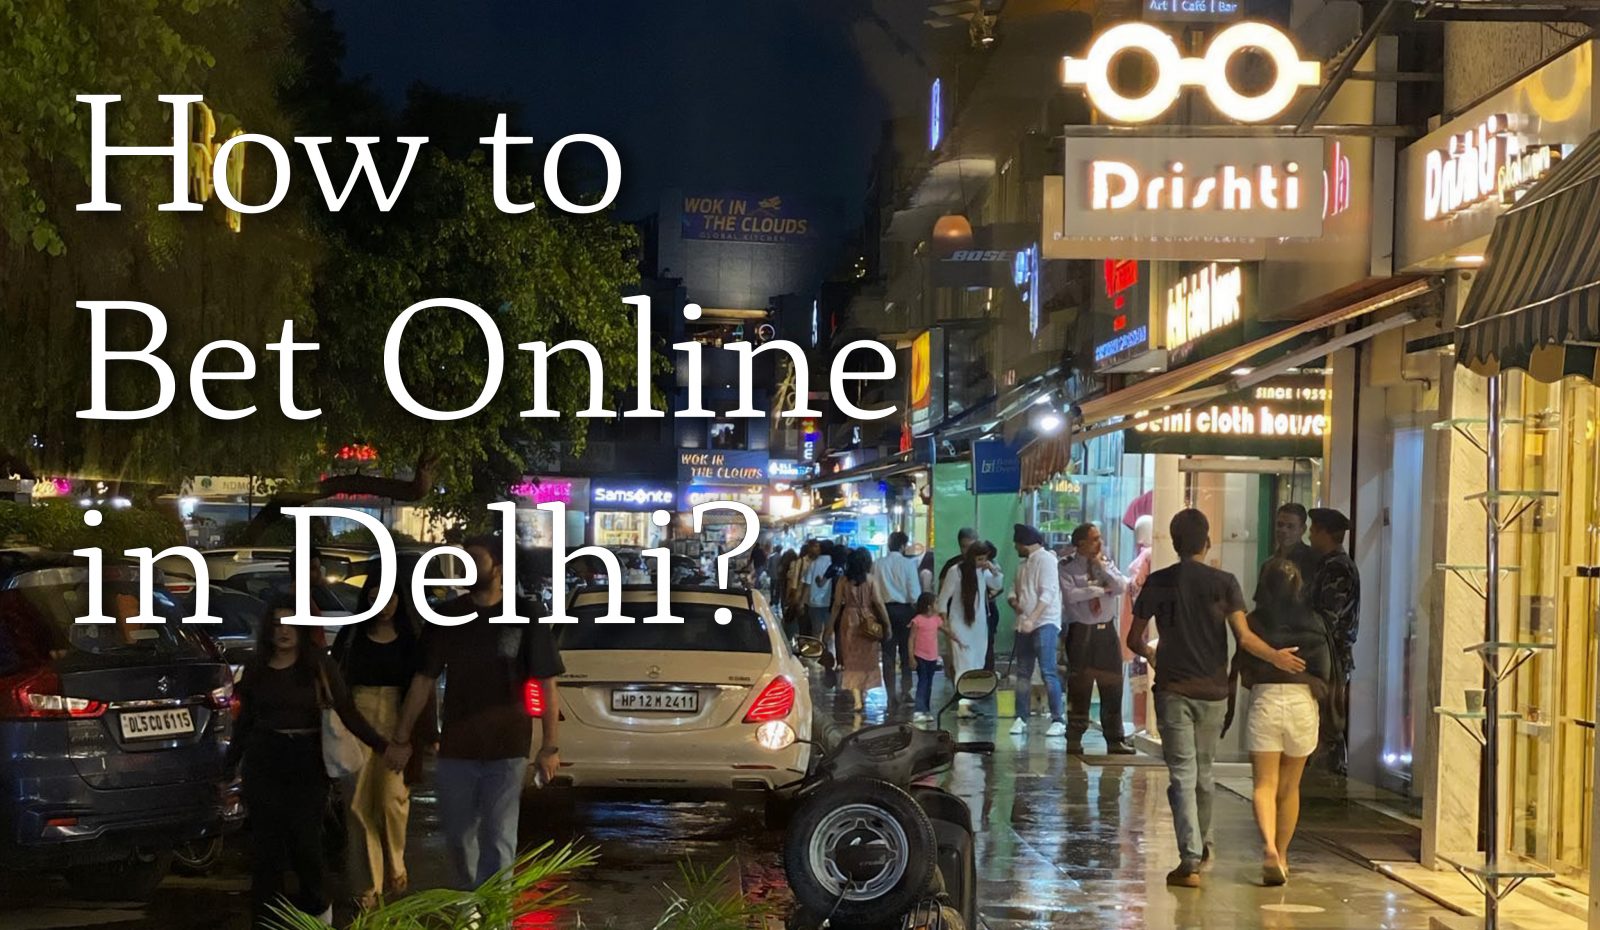 A group of excited friends in Delhi using a laptop and mobile devices to place bets online, with a backdrop of popular sports like cricket, football, and tennis, illustrating the steps and strategies for successful online betting in Delhi.